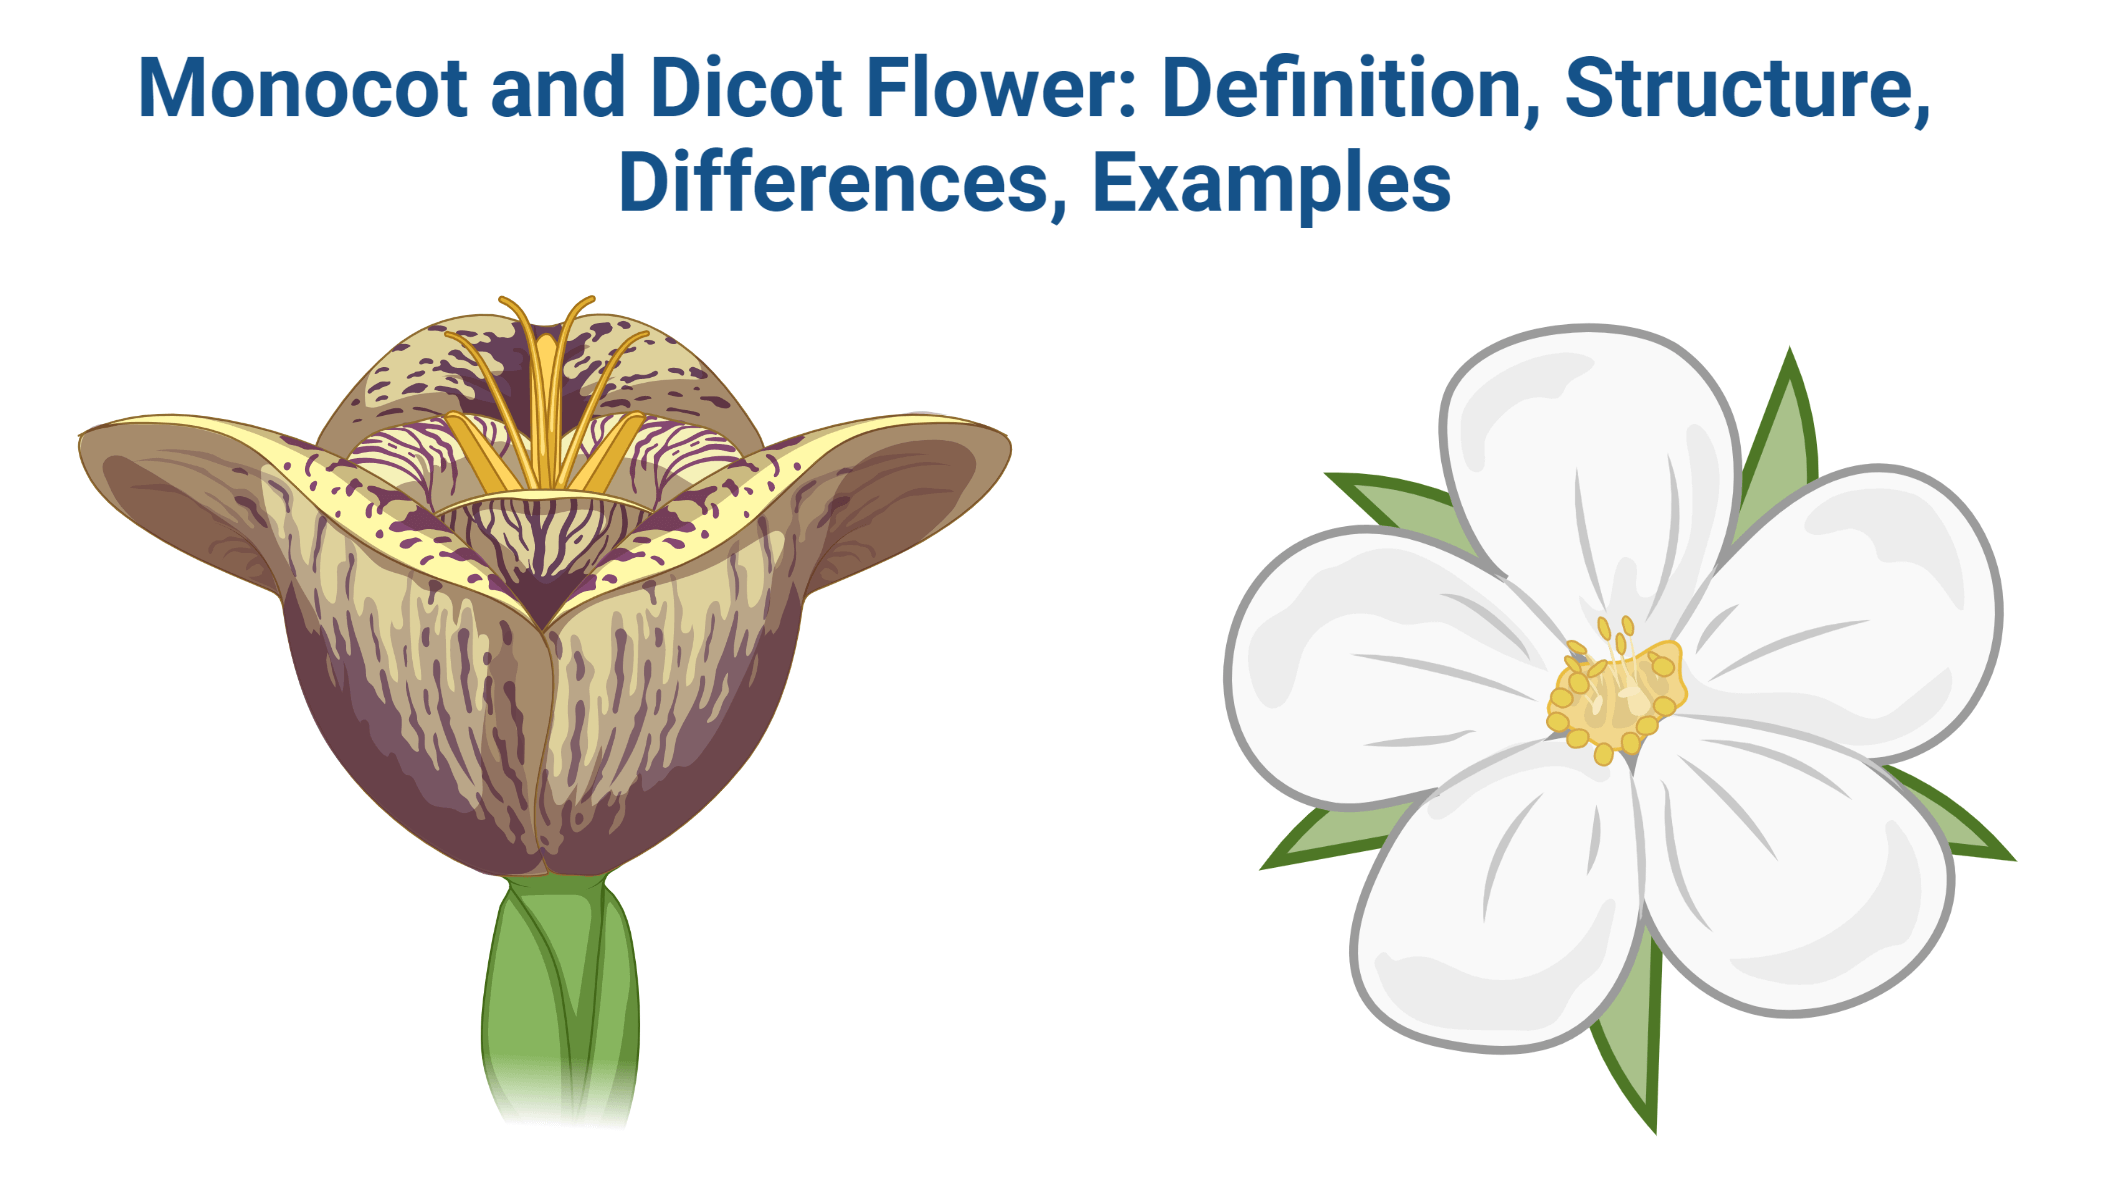 Monocot and Dicot Flower: Definition, Structure, Differences, Examples